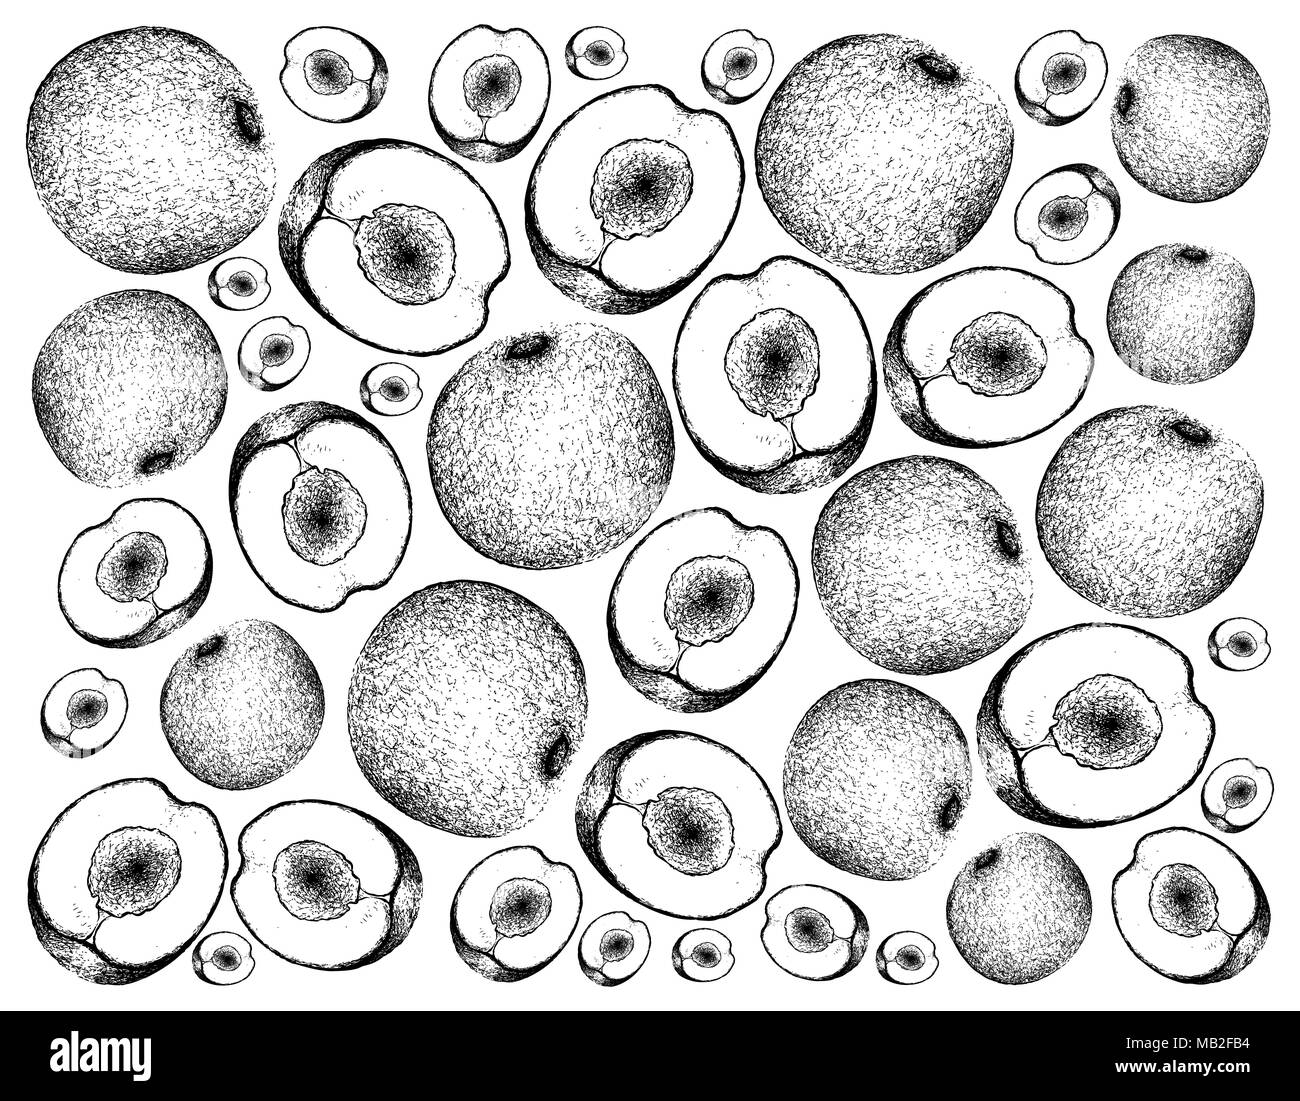 Exotic Fruits, Illustration Wallpaper Background of Hand Drawn Sketch Davidson Plums or Davidsonia Fruits. High in Vitamin C with Essential Nutrient f Stock Photo